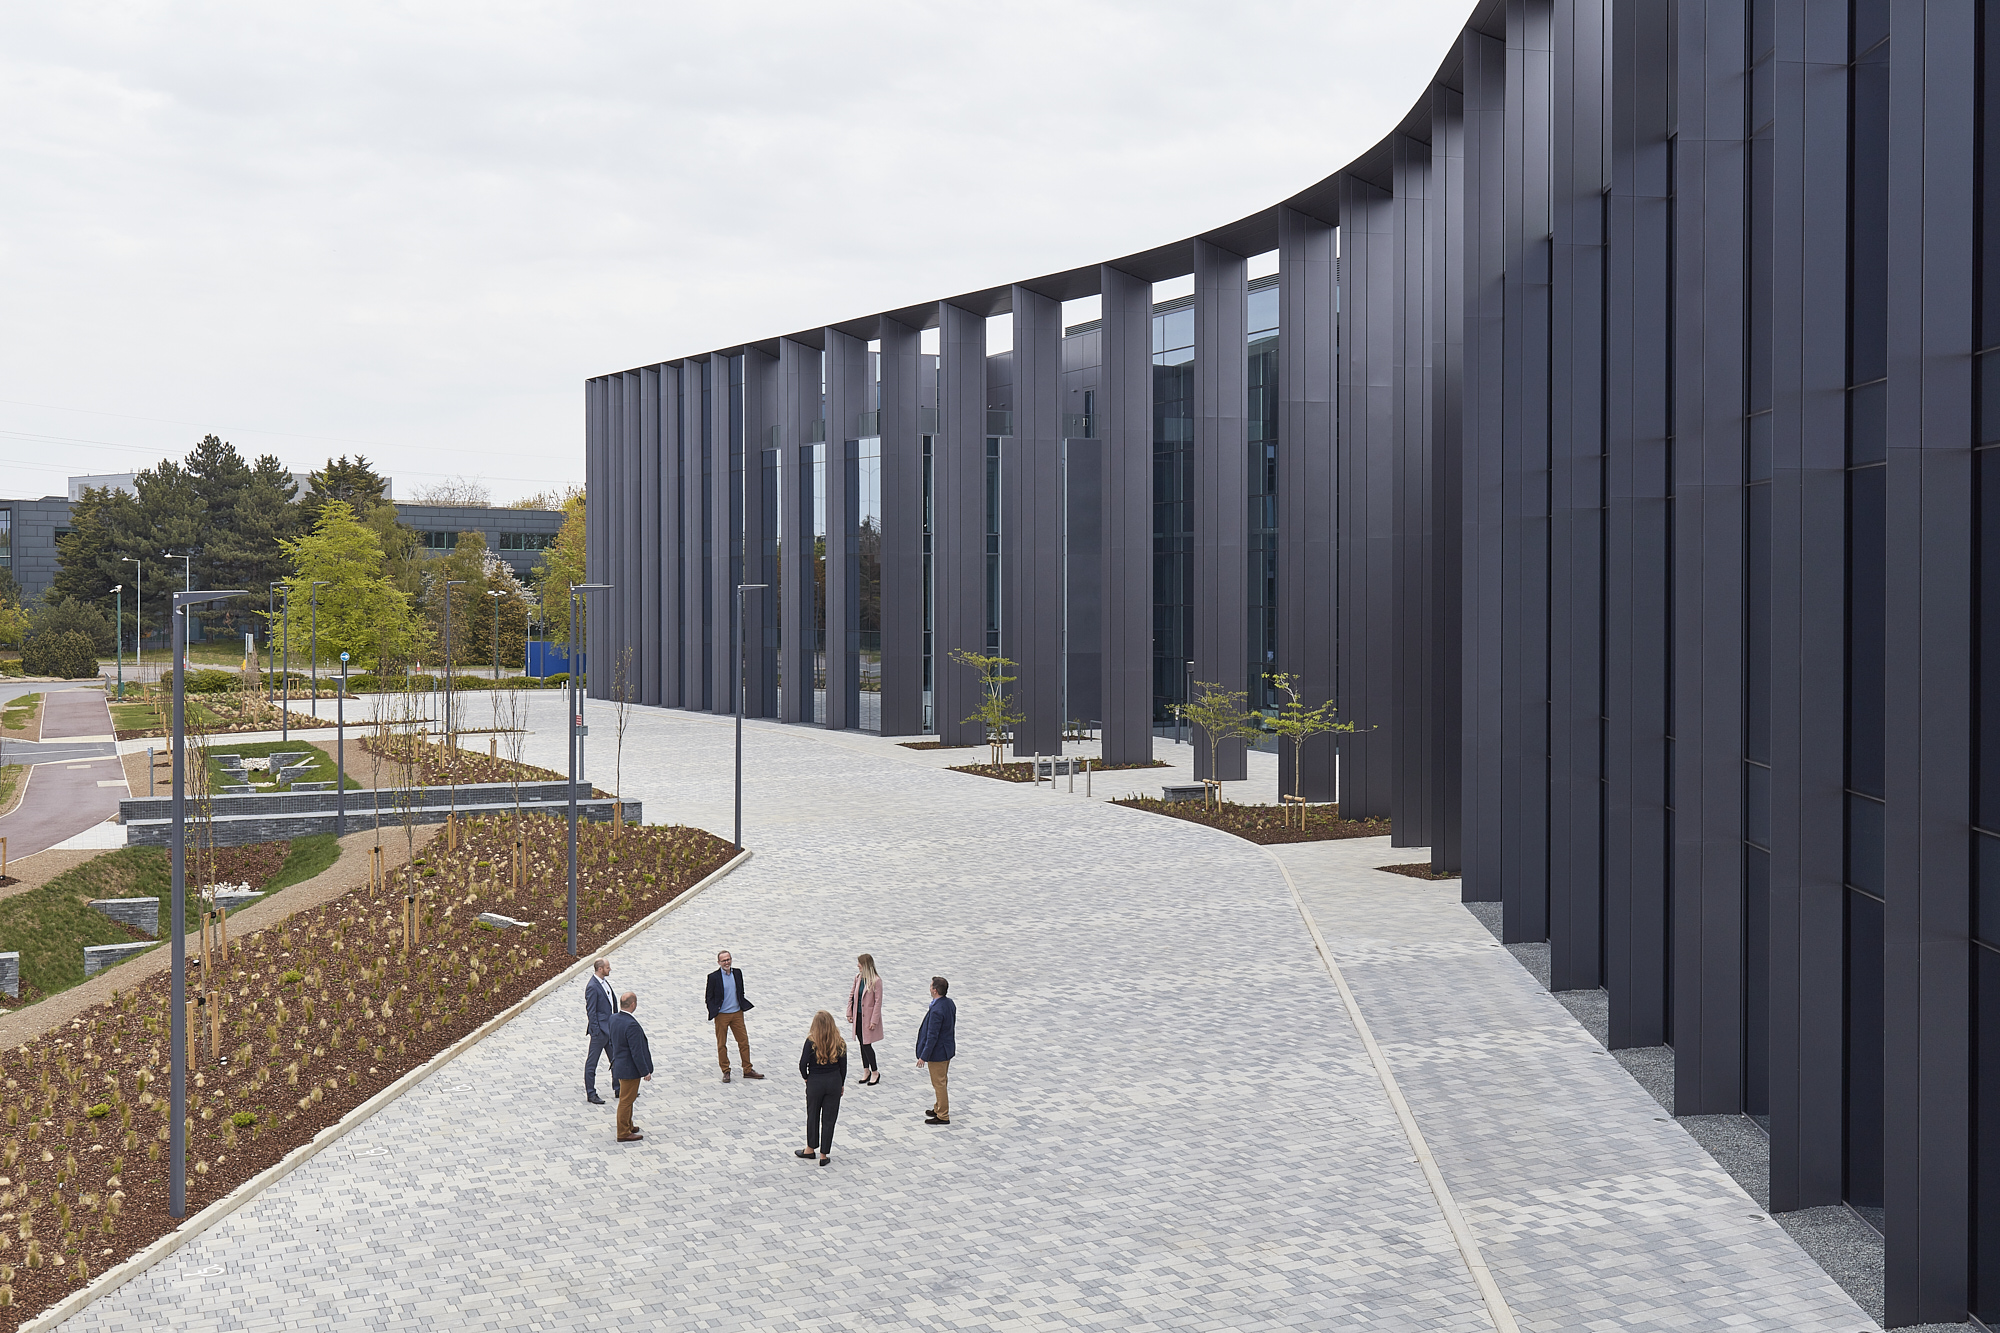 Delivering the next phase of renewal and investment at Cambridge Science Park